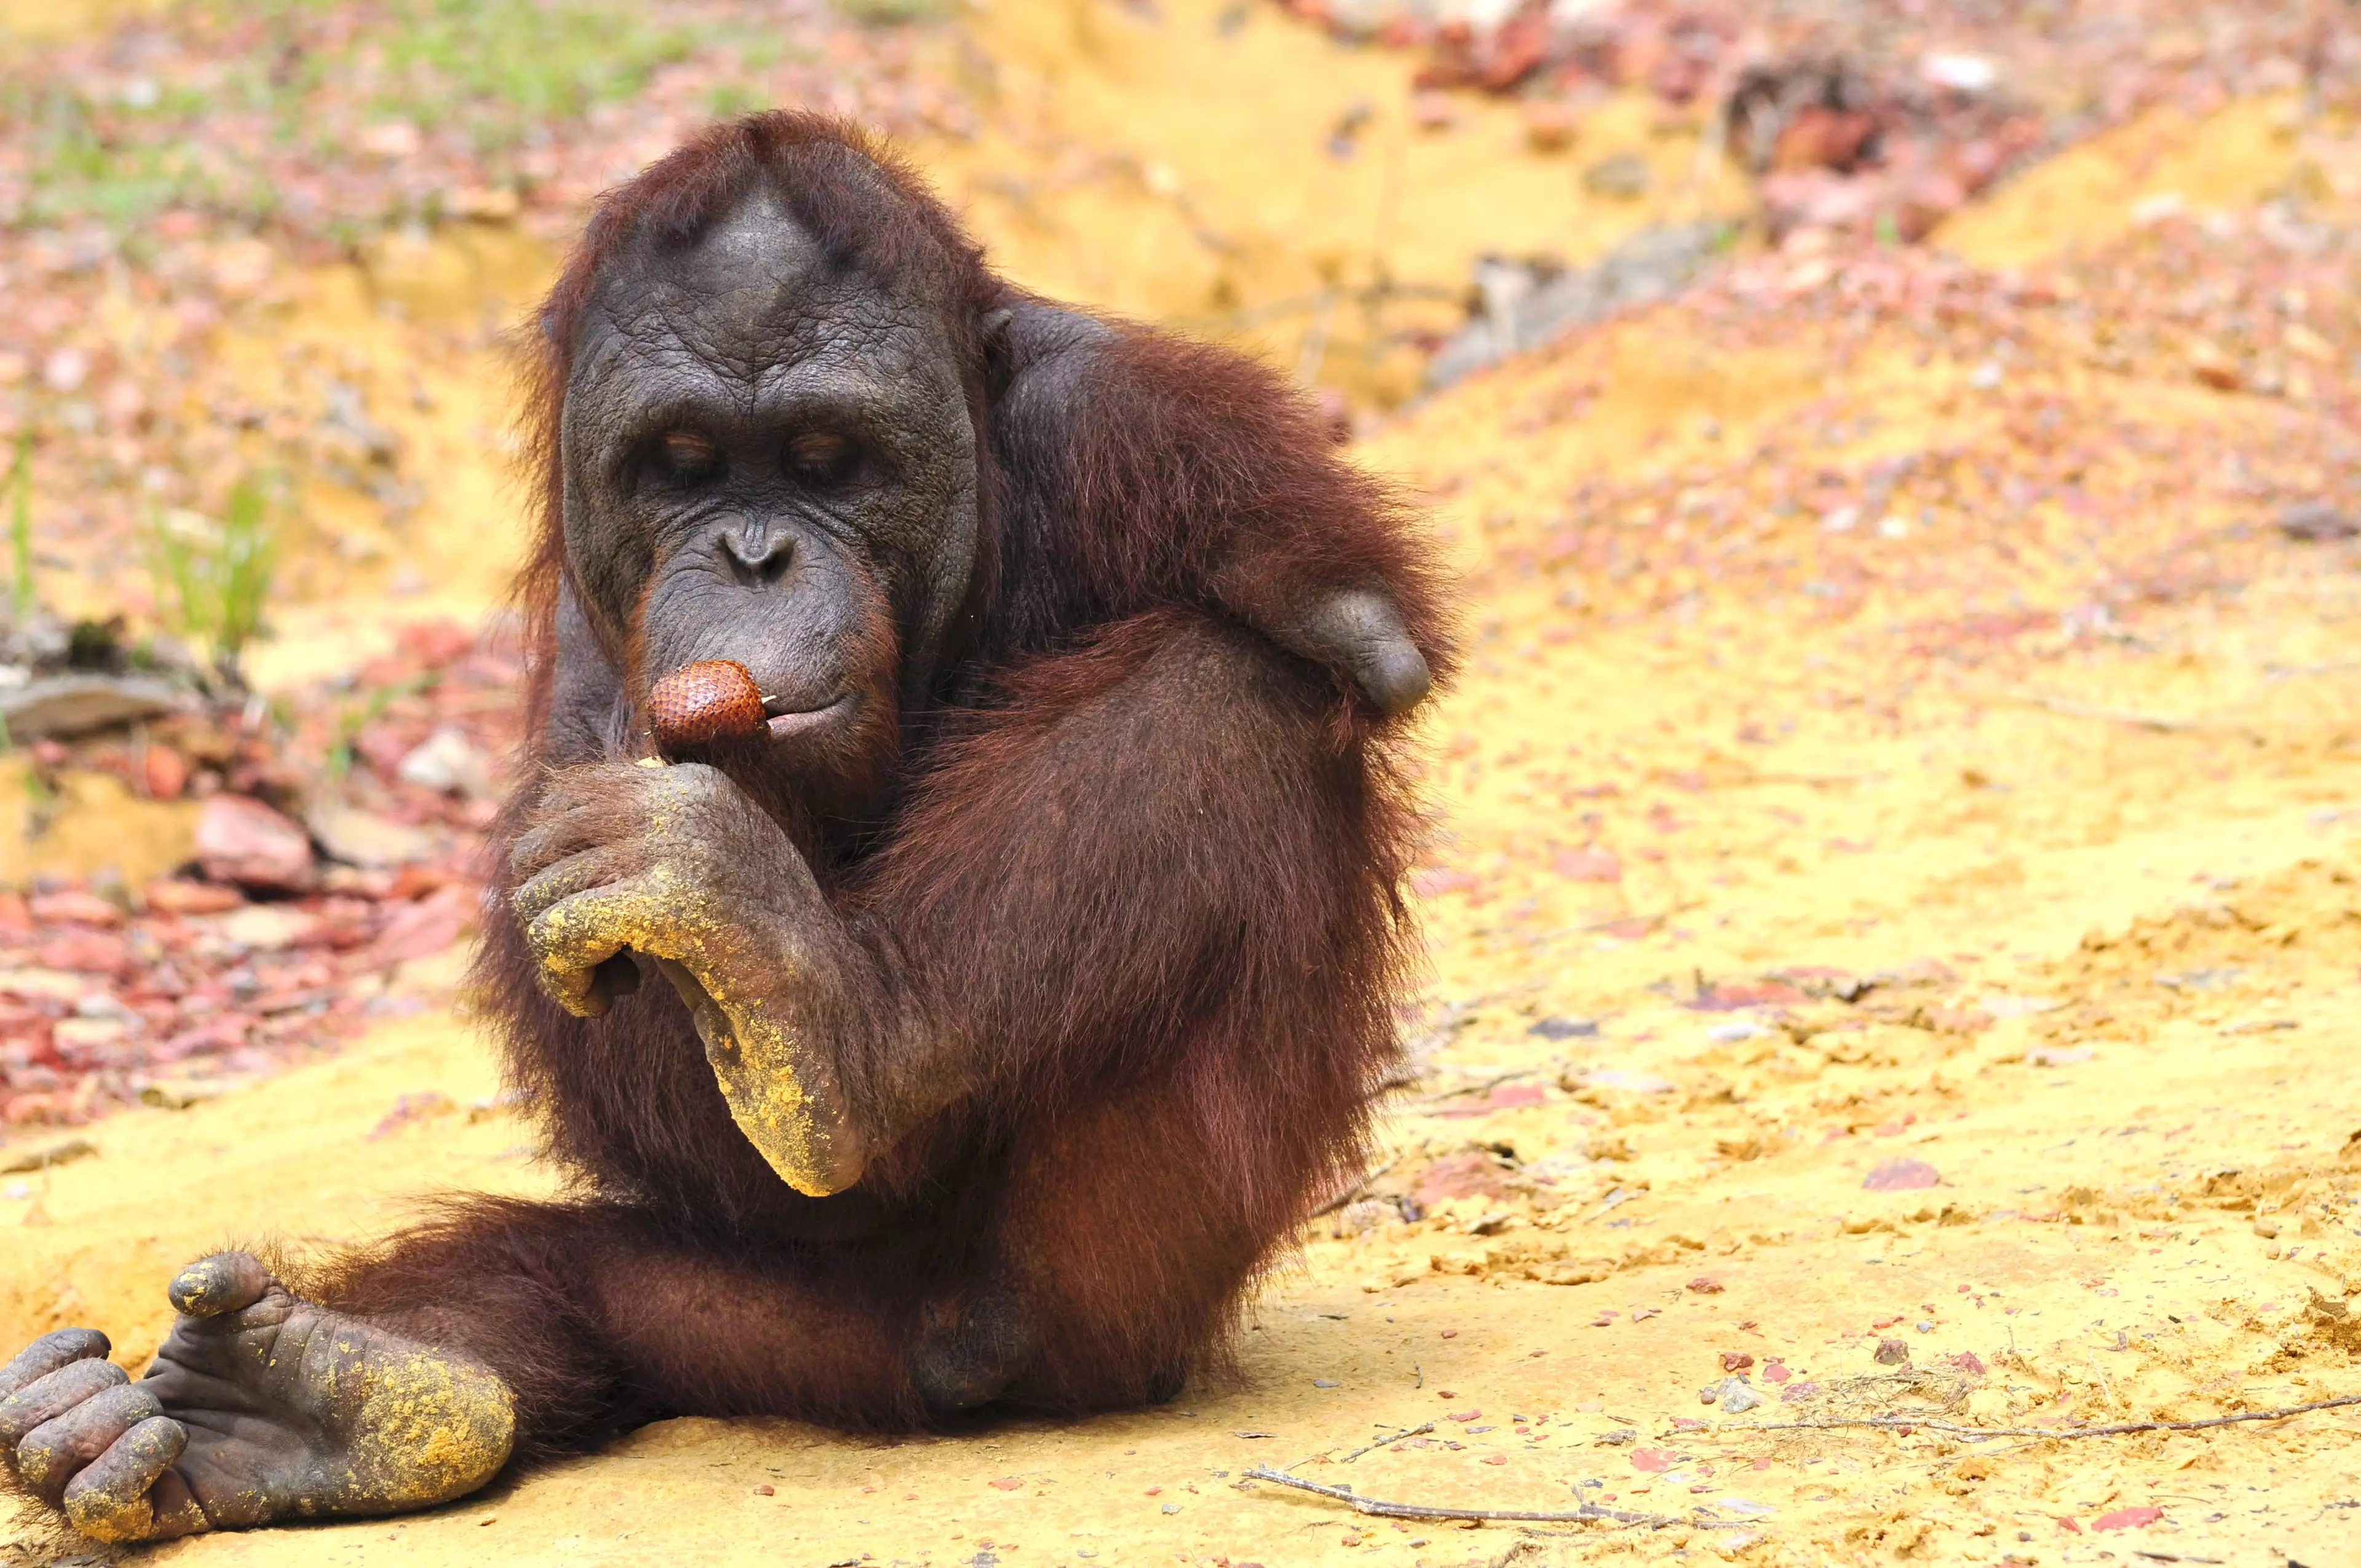 Kopral has learnt to do things with his feet (